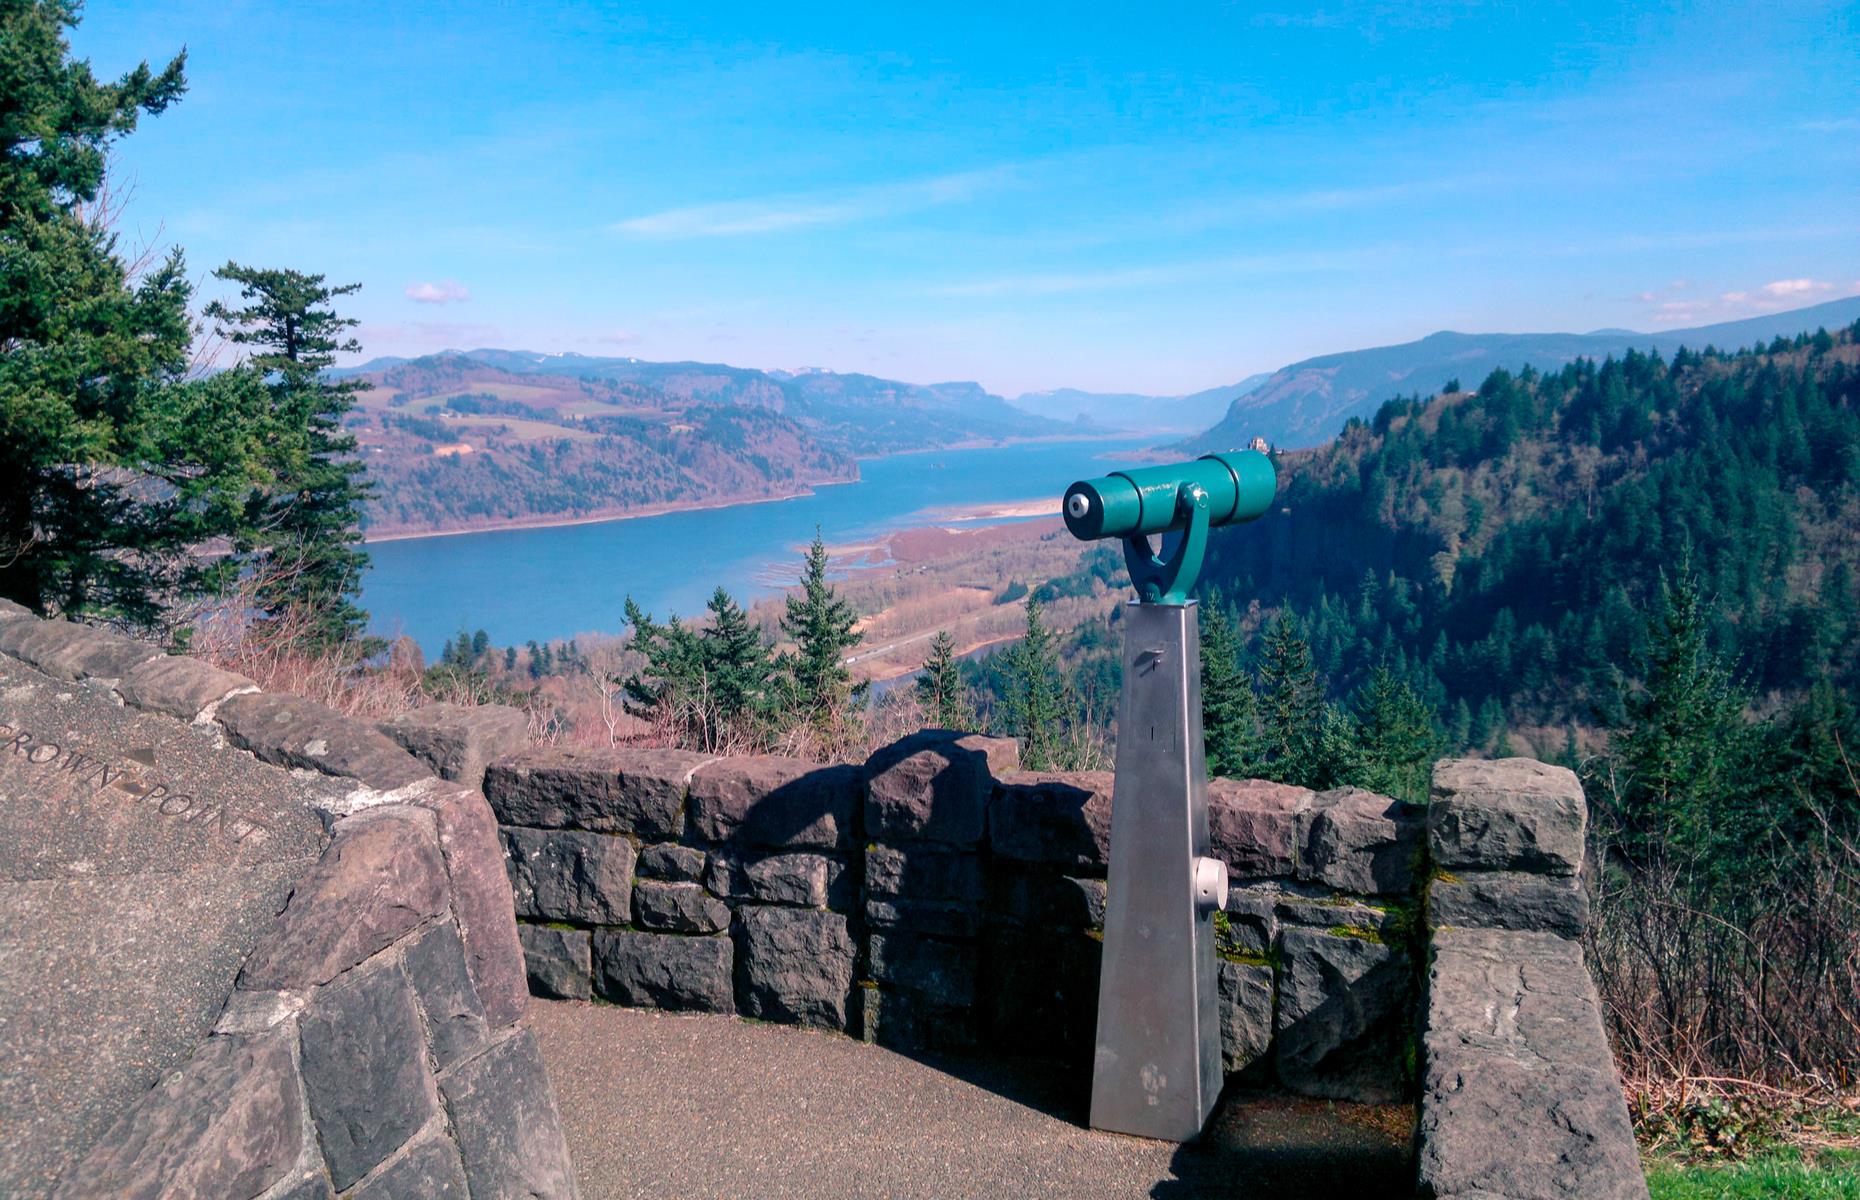 <p>There are plenty of scenic pitstops along the way, and the Portland Women’s Forum State Scenic Viewpoint (pictured) is one of the most popular spots to drink in the river views. Further on you’ll reach the Horsetail Falls Trail, a breathtaking loop that passes several thundering waterfalls. </p>  <p><a href="https://www.loveexploring.com/gallerylist/96880/americas-most-beautiful-waterfalls"><strong>Discover America's most beautiful waterfalls</strong></a></p>